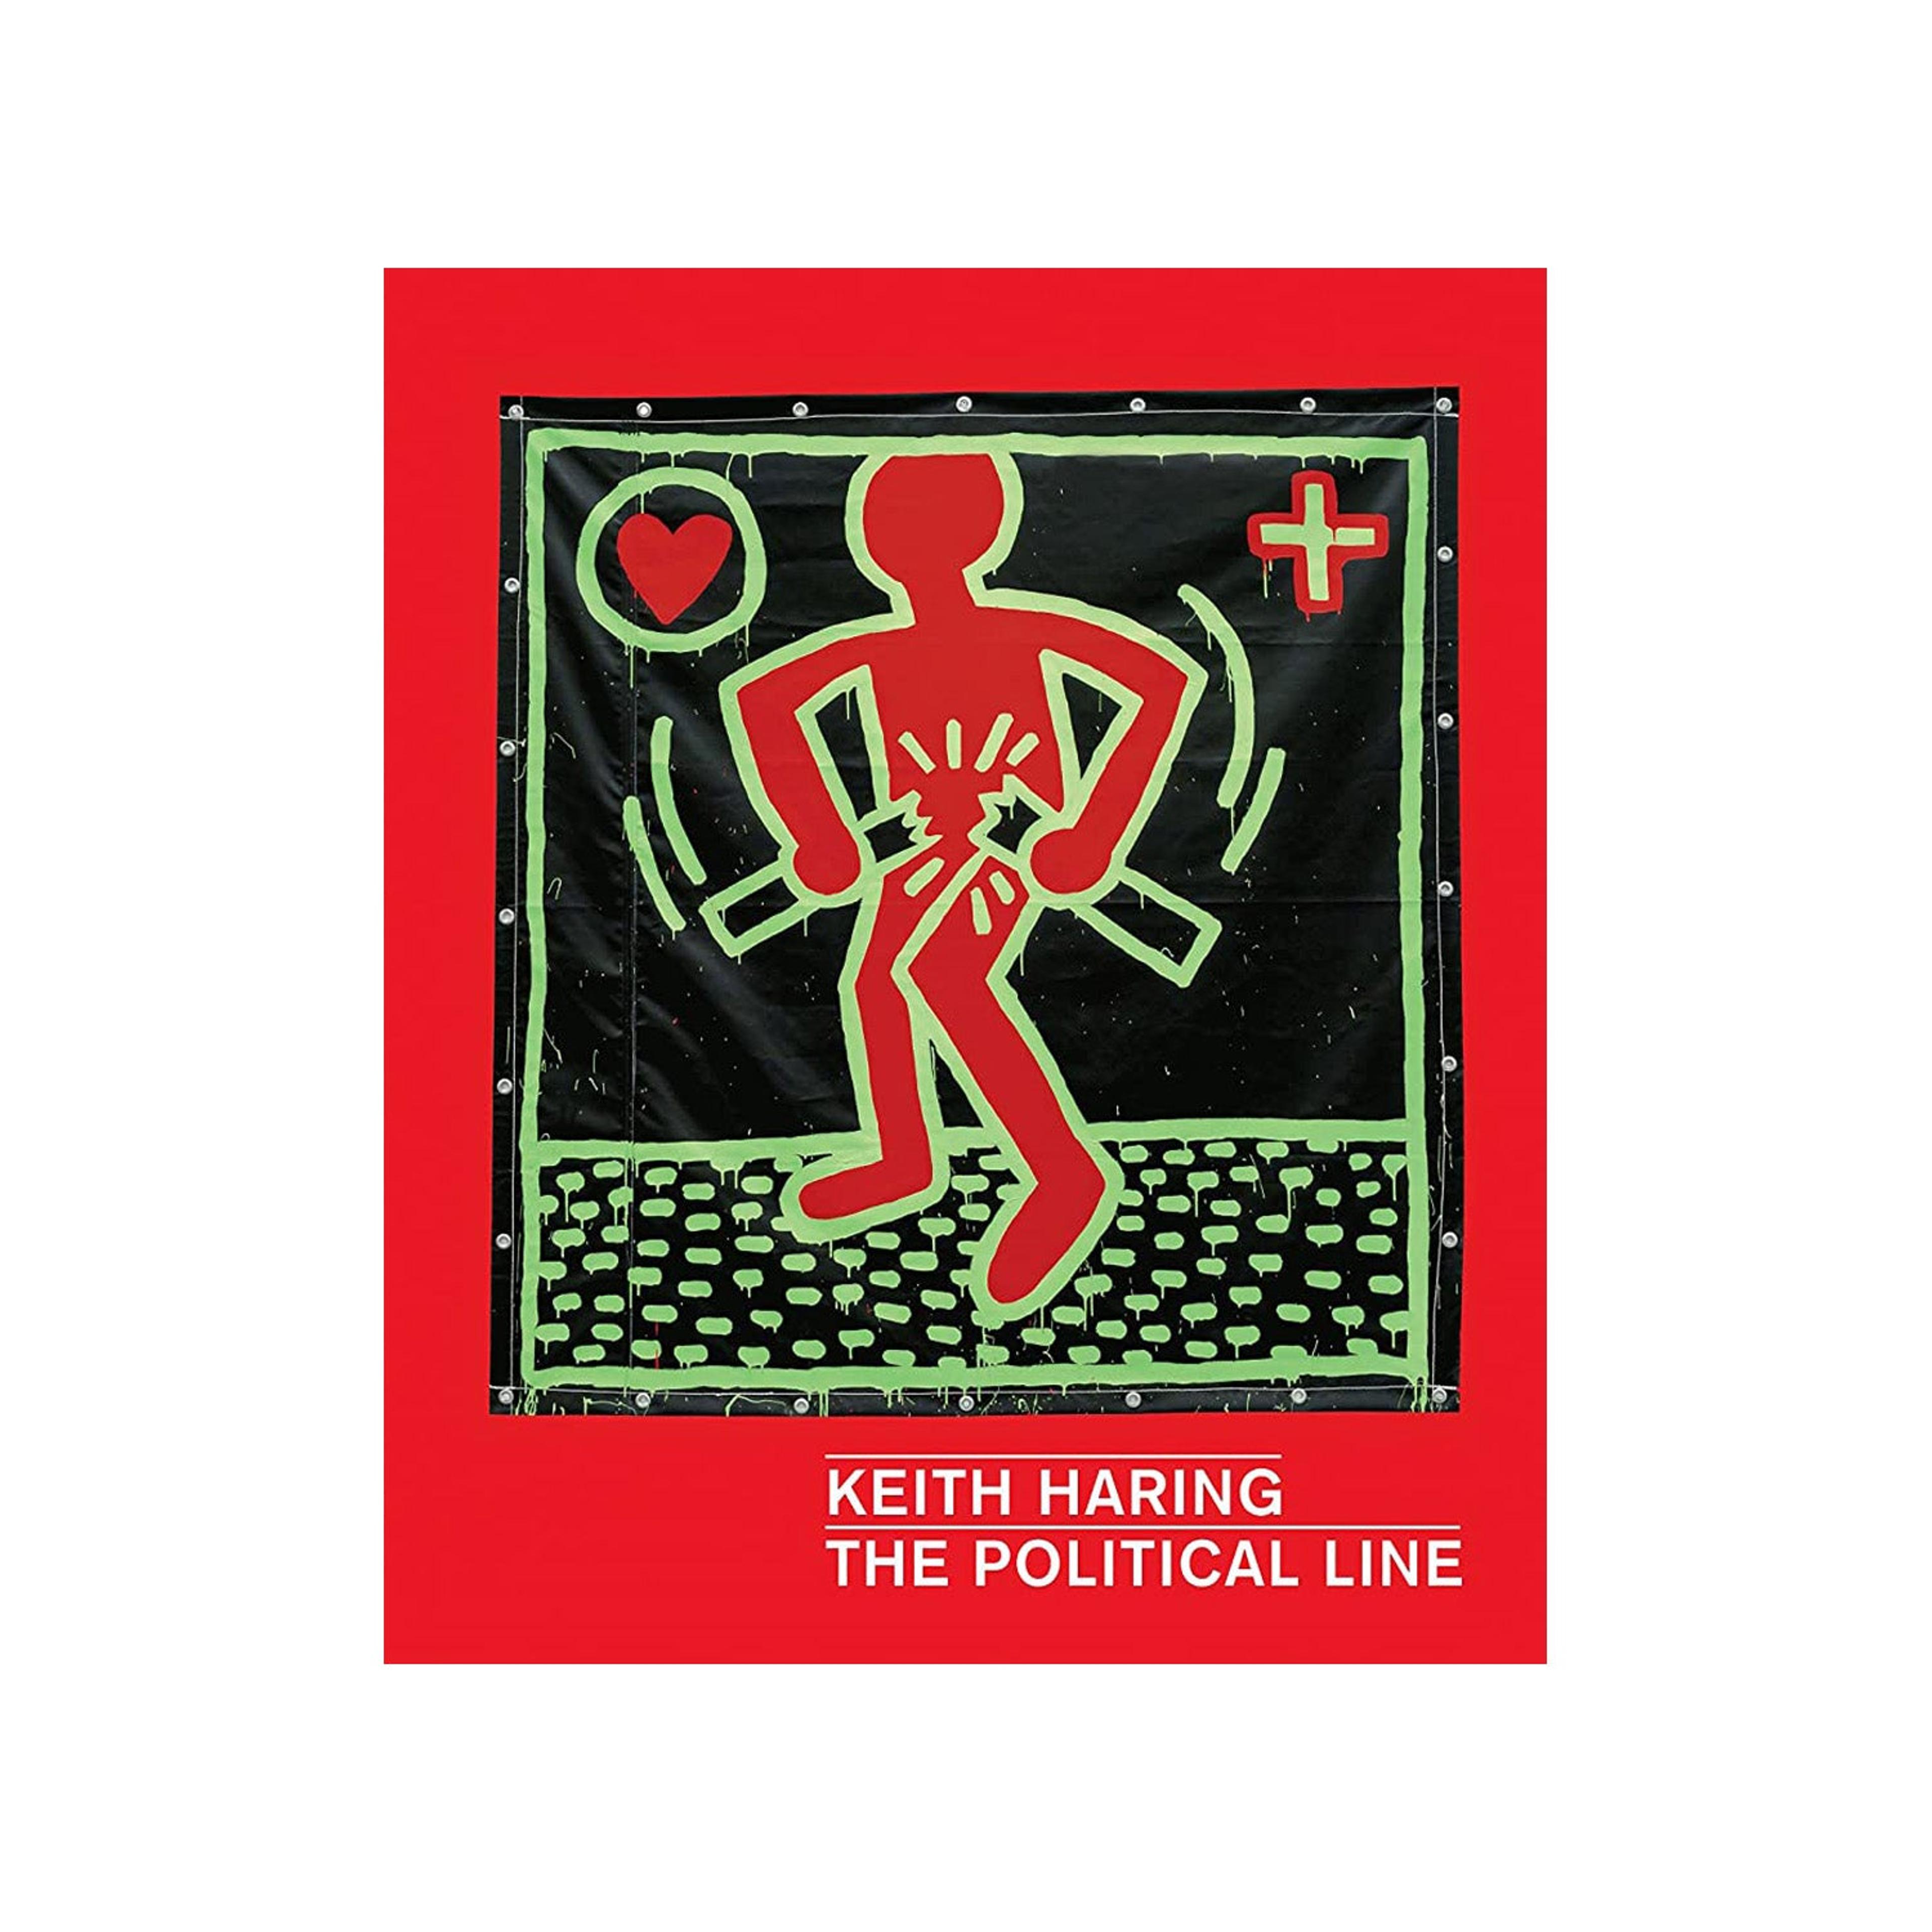 Keith Haring 'The Political Line'